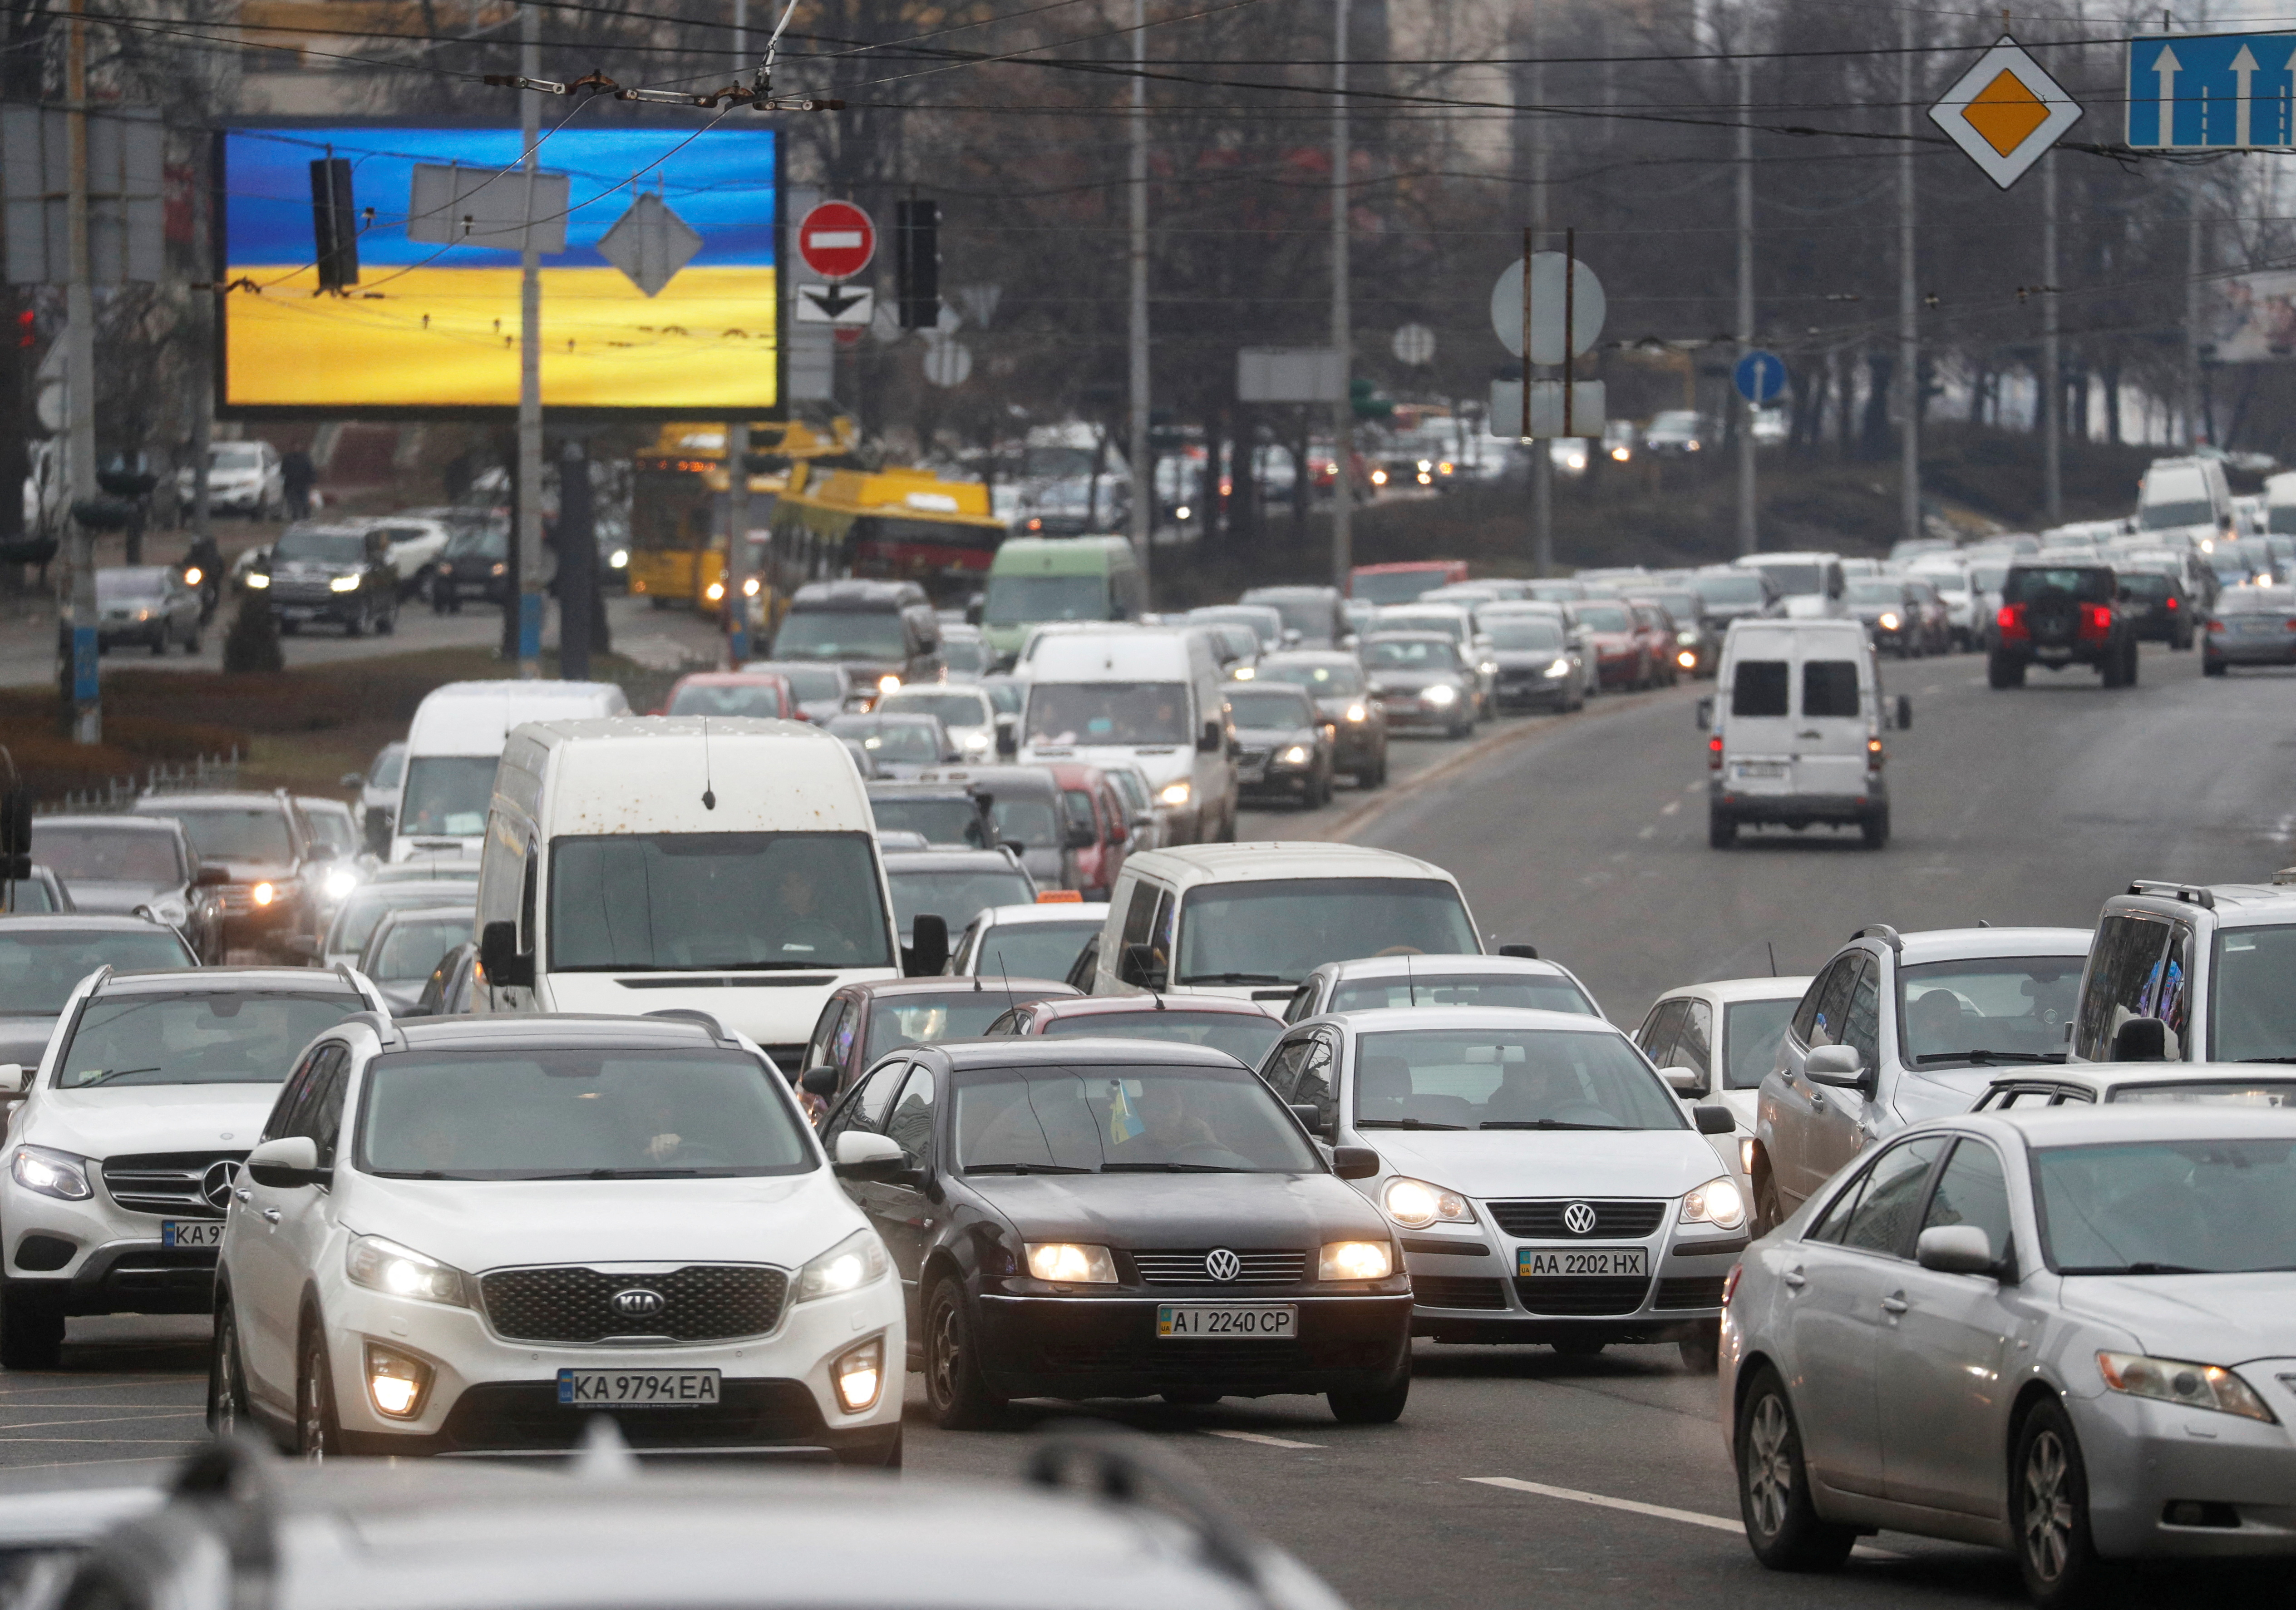 Cars drive towards the exit of the city after Russian President Vladimir Putin authorized a military operation in eastern Ukraine, in Kyiv, Ukraine February 24, 2022. REUTERS/Valentyn Ogirenko